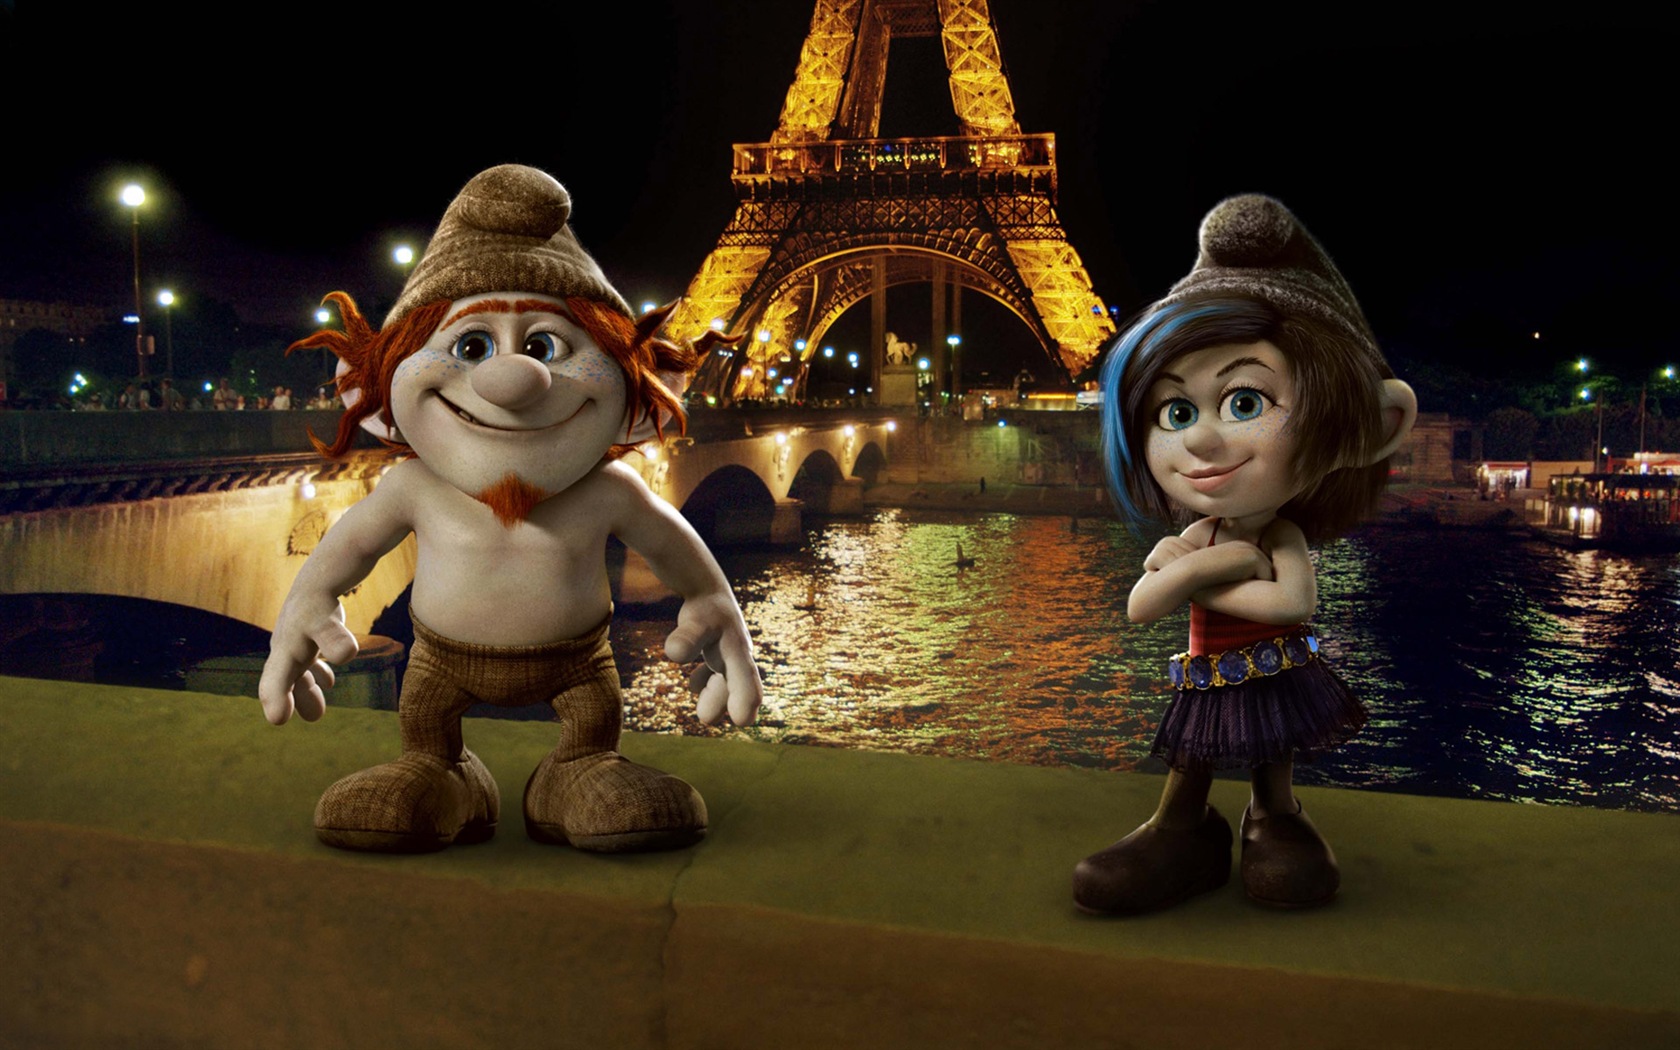 The Smurfs 2 HD movie wallpapers #6 - 1680x1050